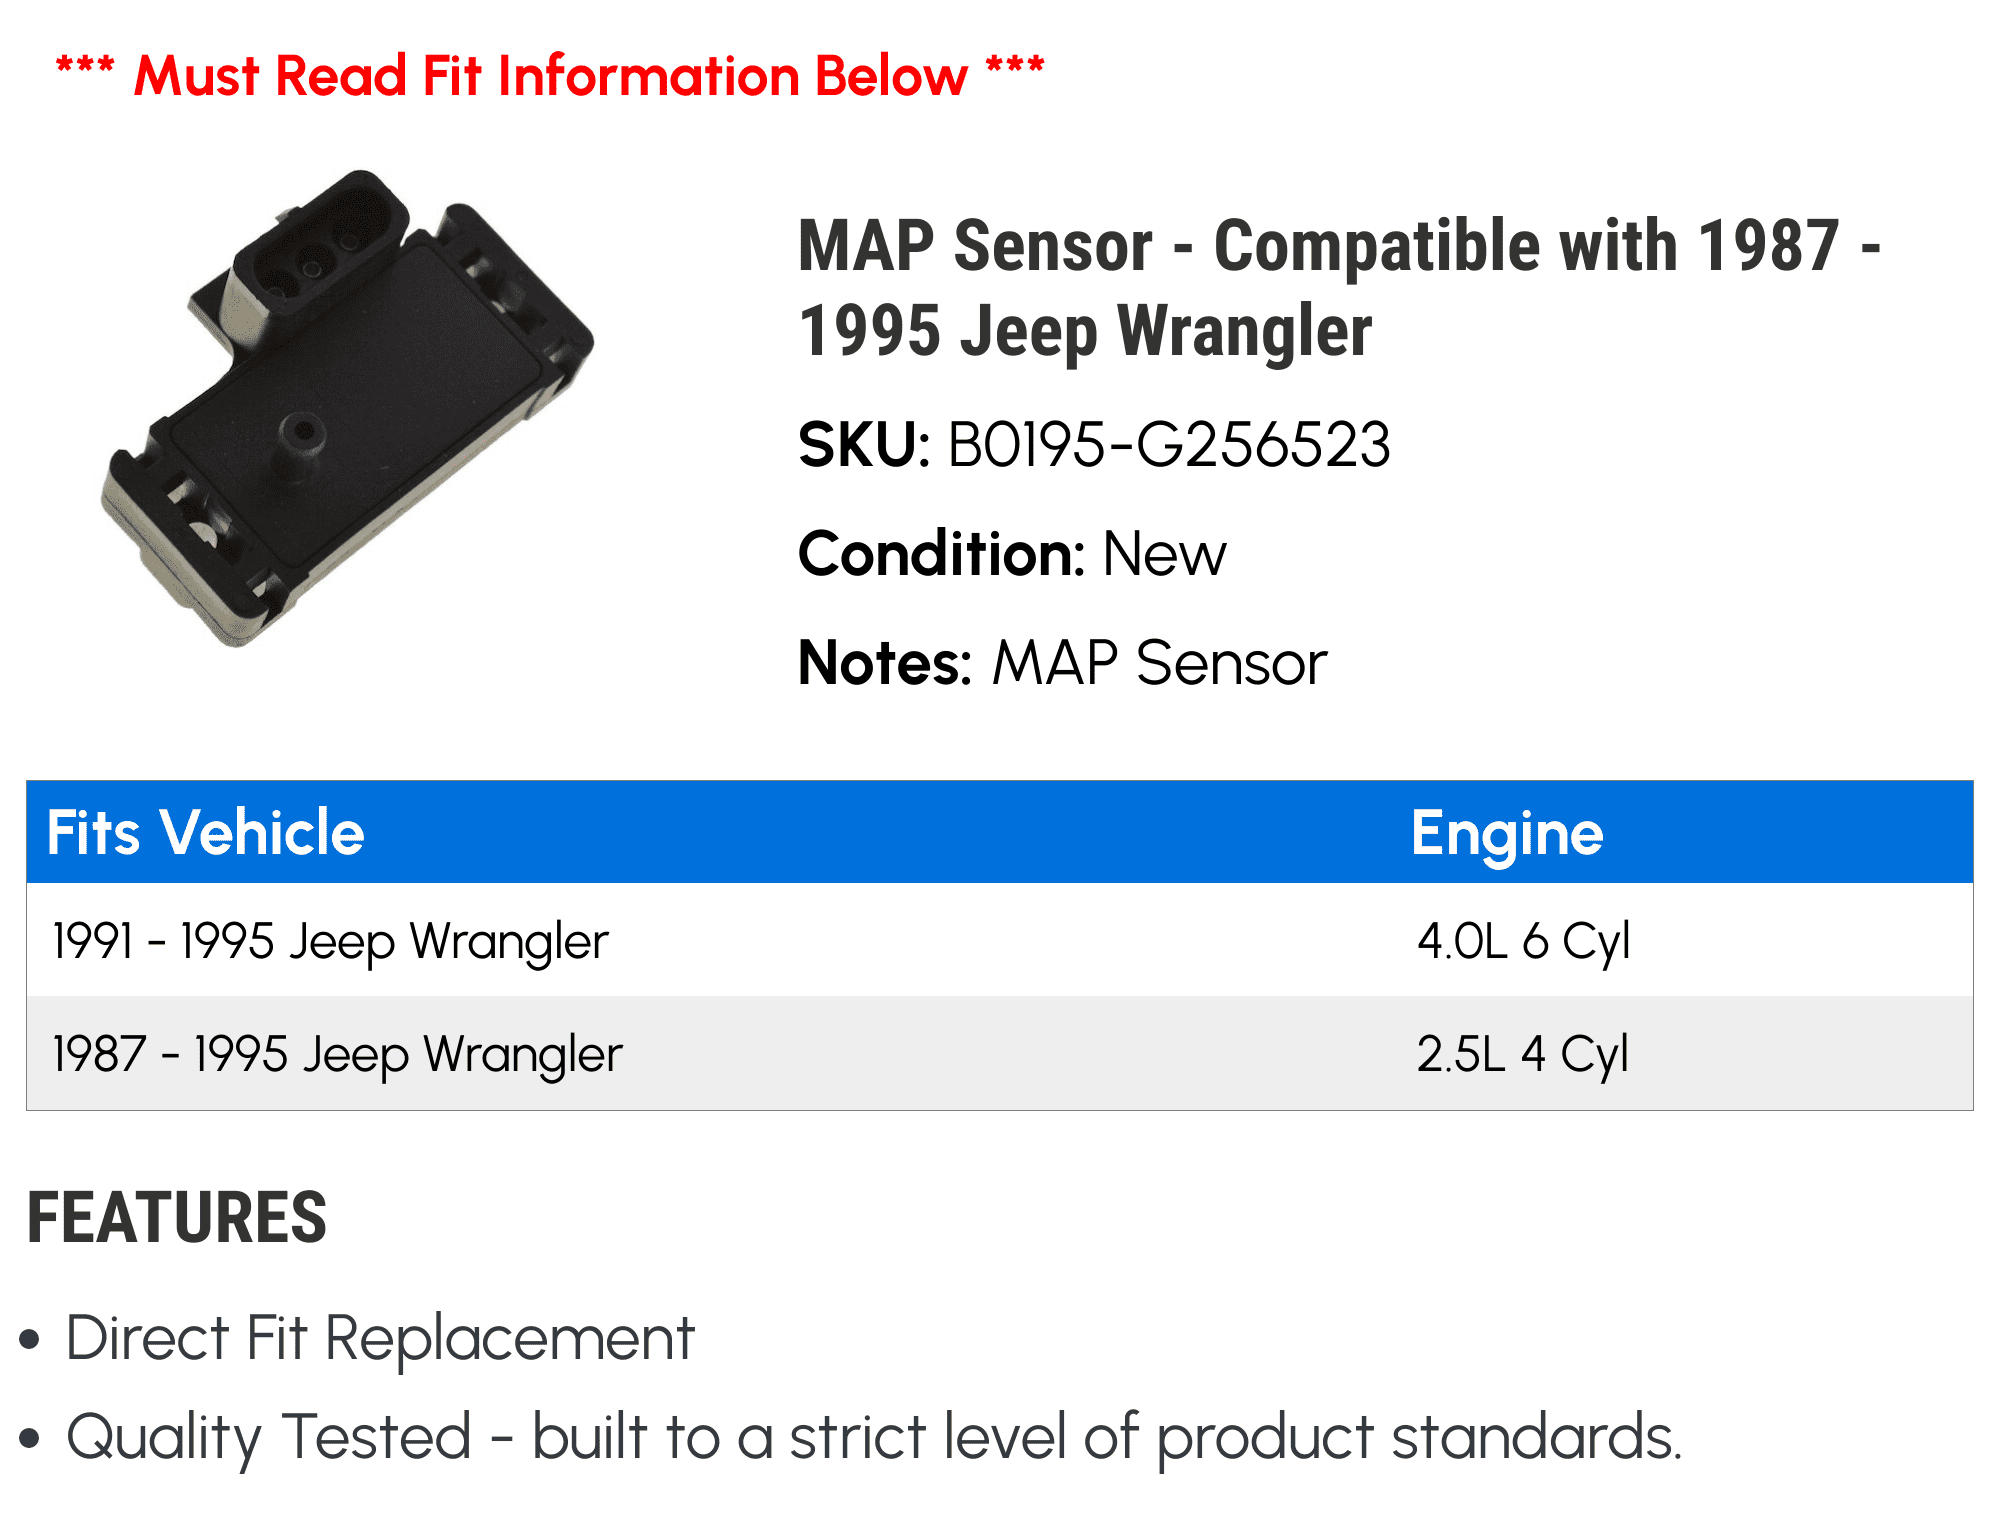 MAP Sensor - Compatible with 1987 - 1995 Jeep Wrangler 1988 1989 1990 1991  1992 1993 1994 